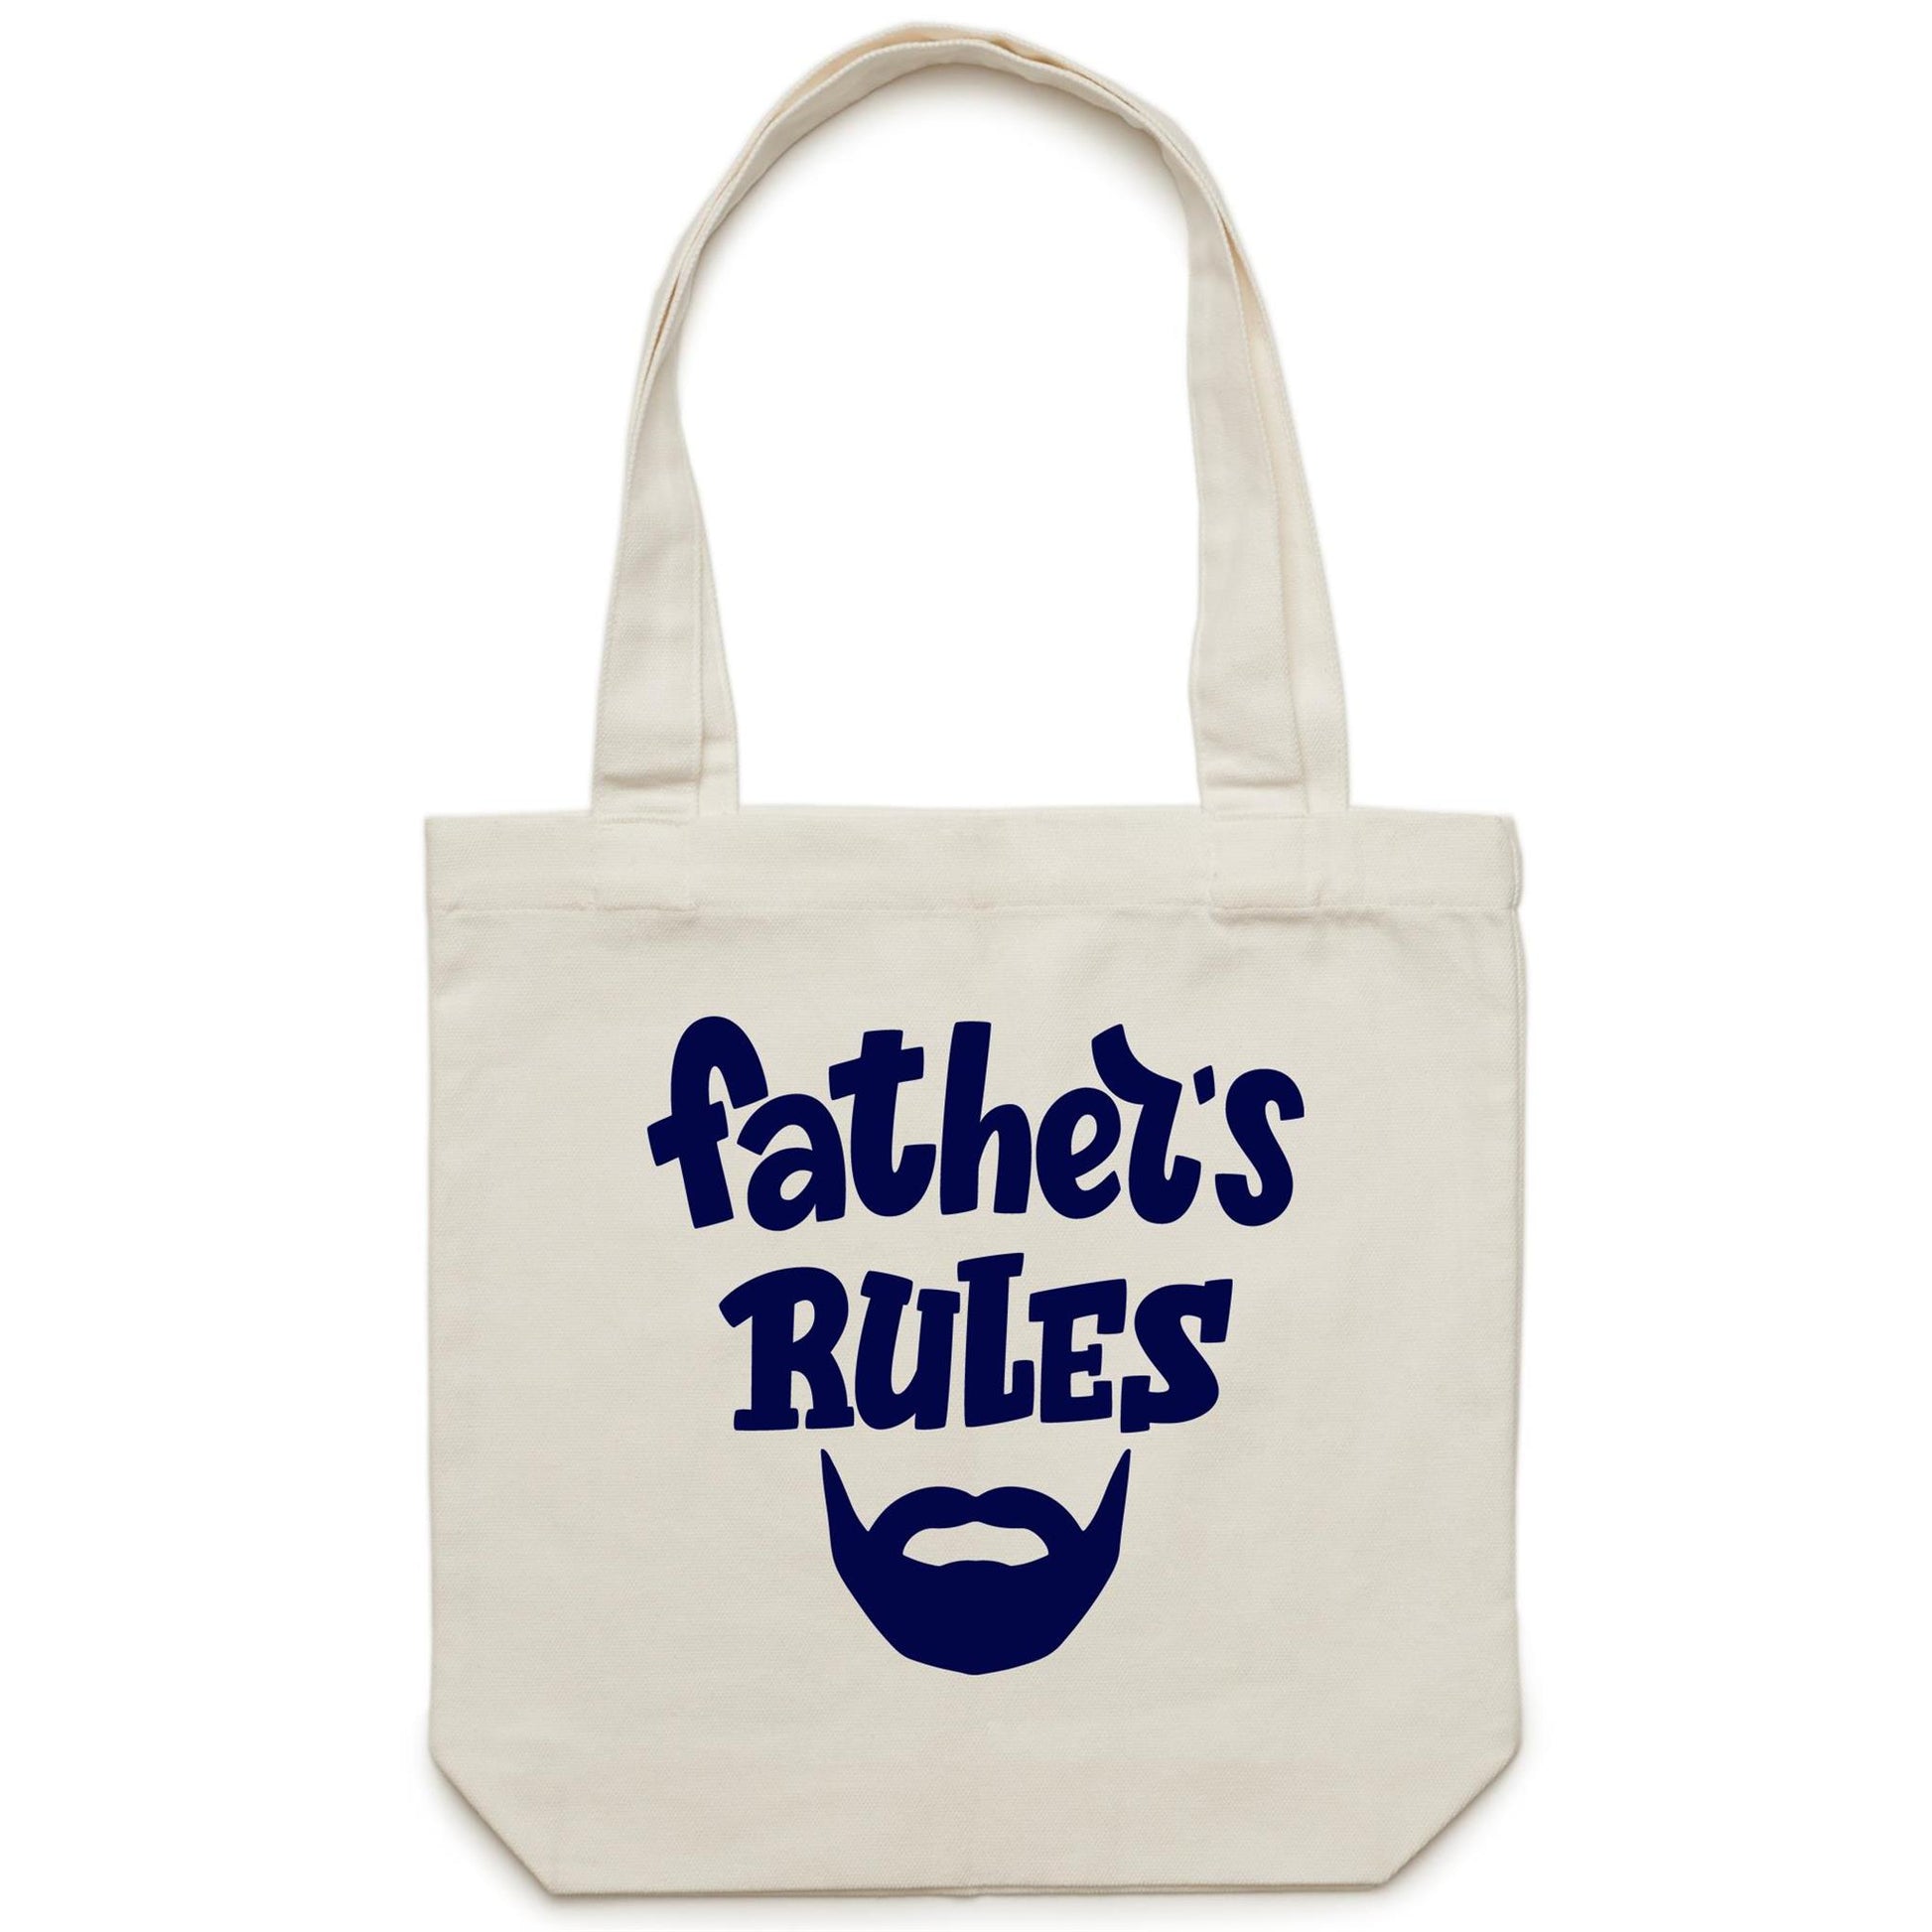 Father's Rules - Canvas Tote Bag Default Title Tote Bag Dad